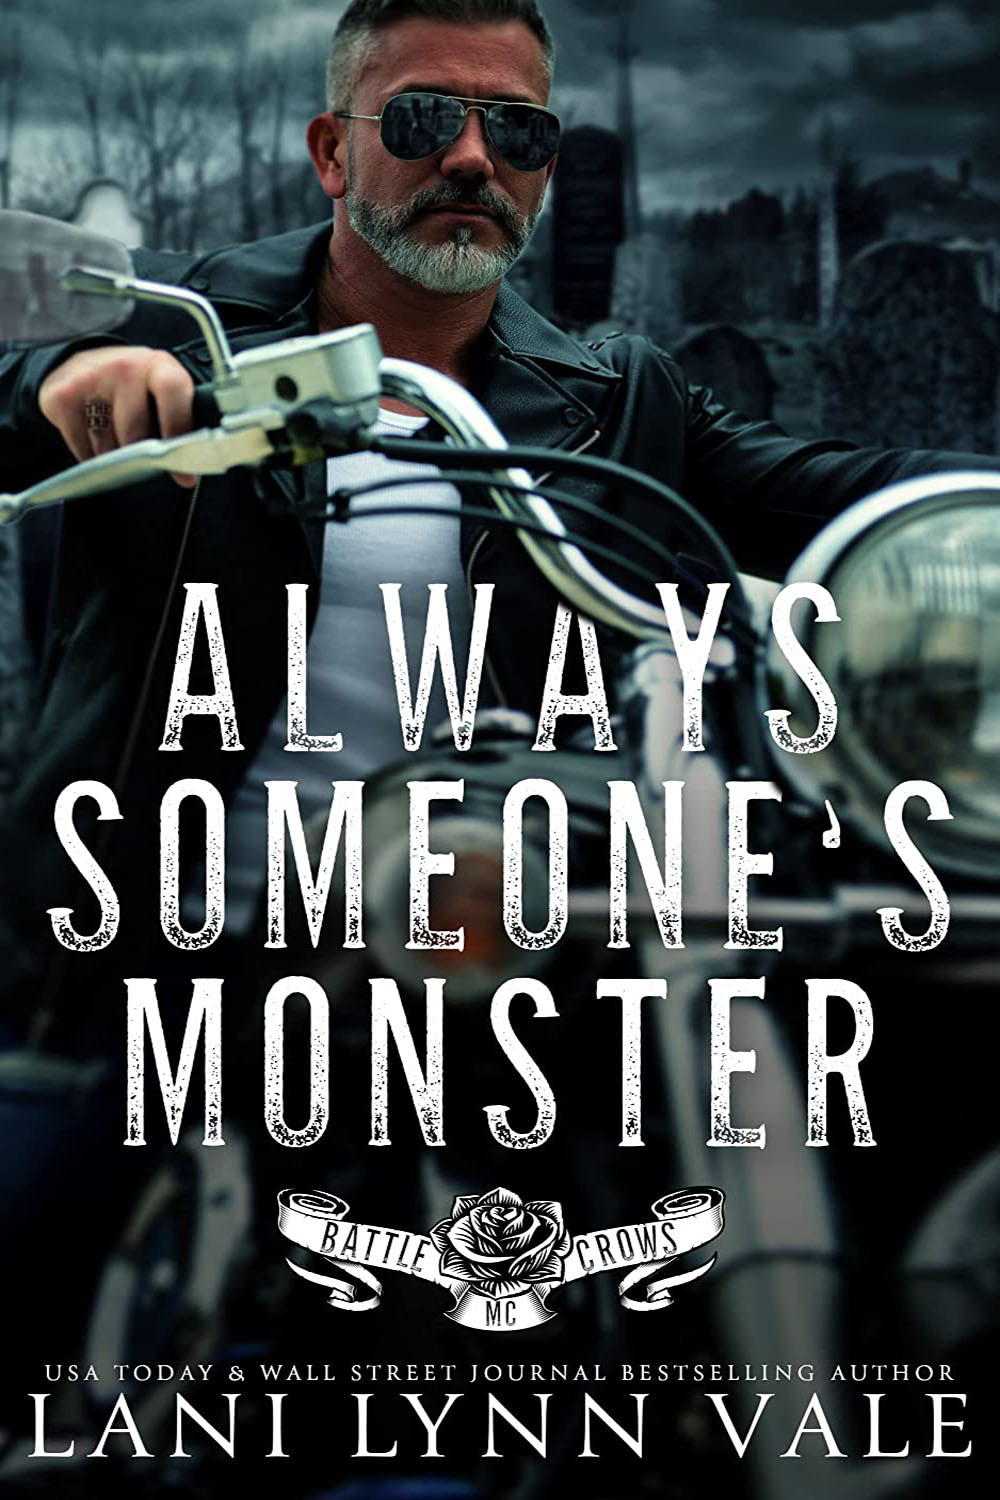 Always Someone’s Monster (Battle Crows MC #1)